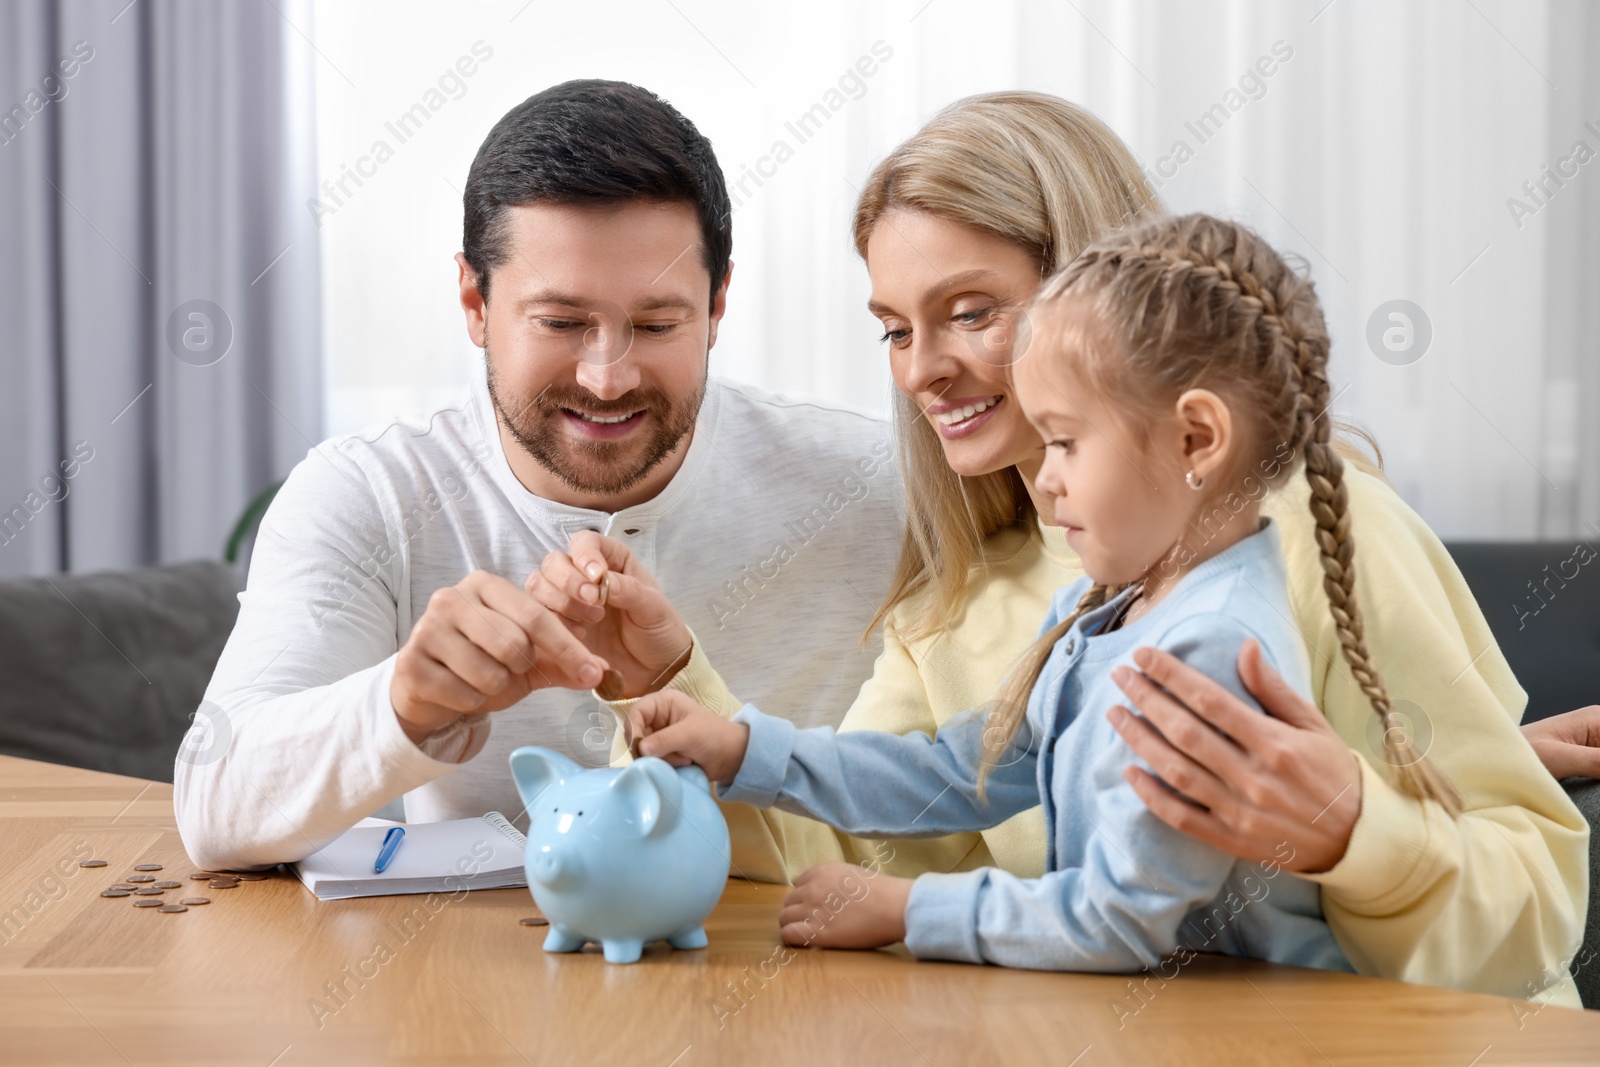 Photo of Planning budget together. Little girl with her family putting coins into piggybank at table indoors